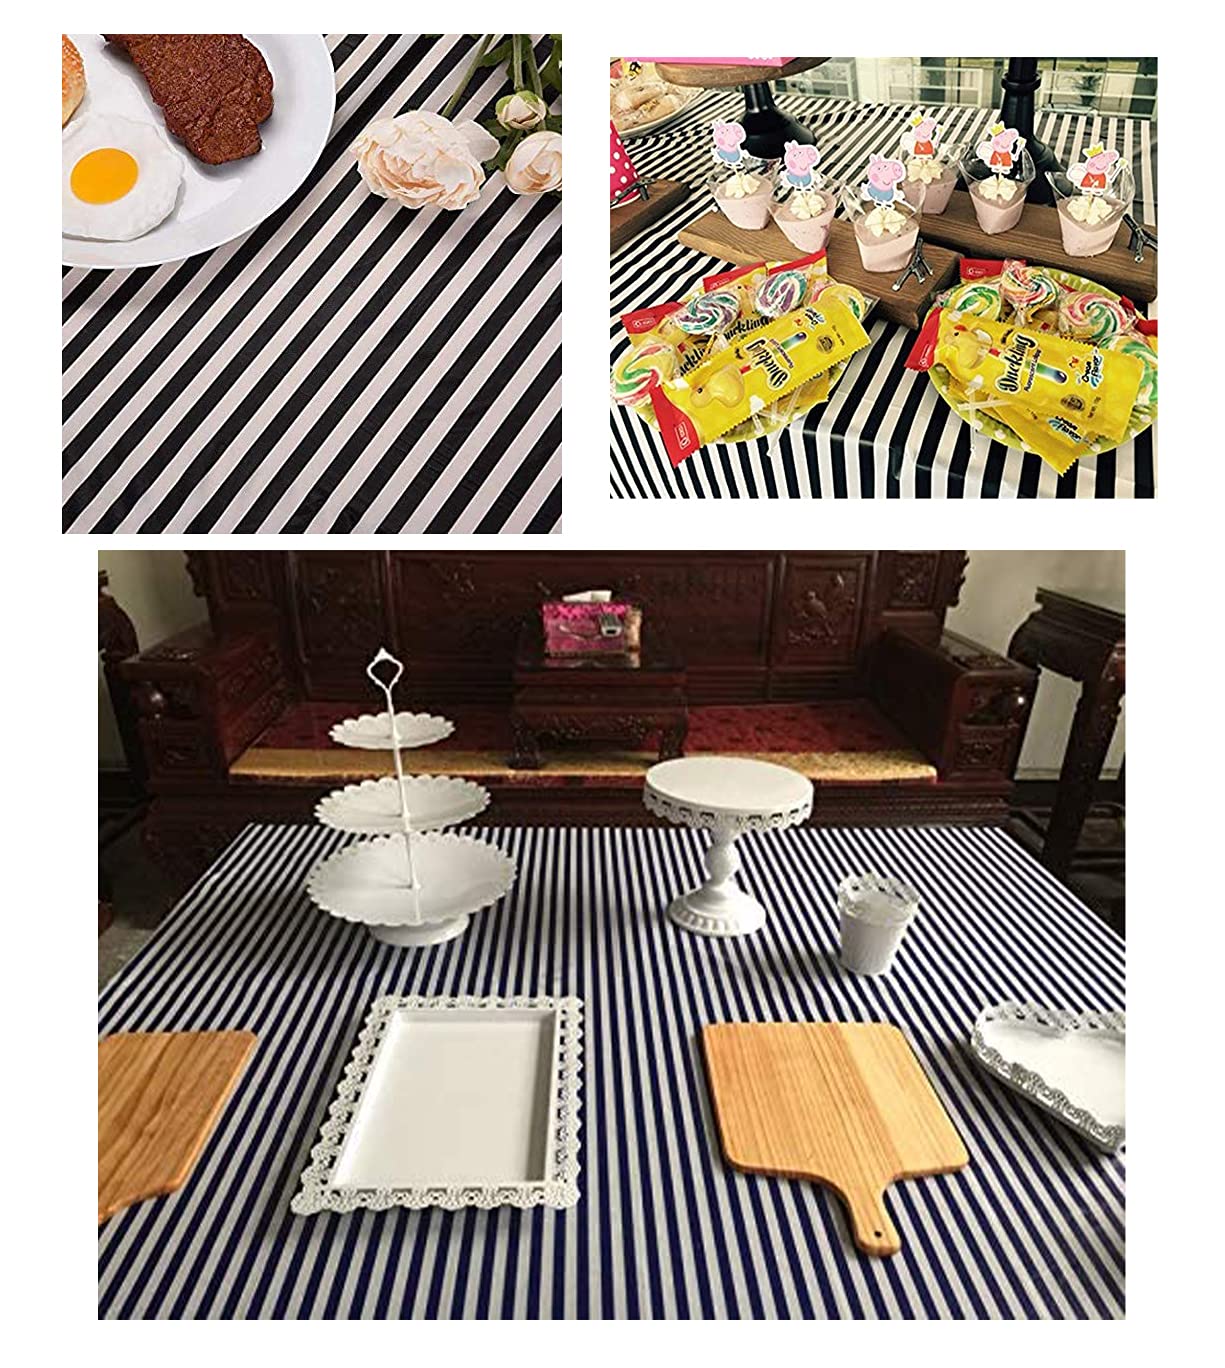 2 Pcs Disposable Black White Stripe Plastic Tablecloth, 108 Inch x 54 Inch Ractangle Tablecover, for Party, Dance and Picnic (2pcs- Black White Stripe)